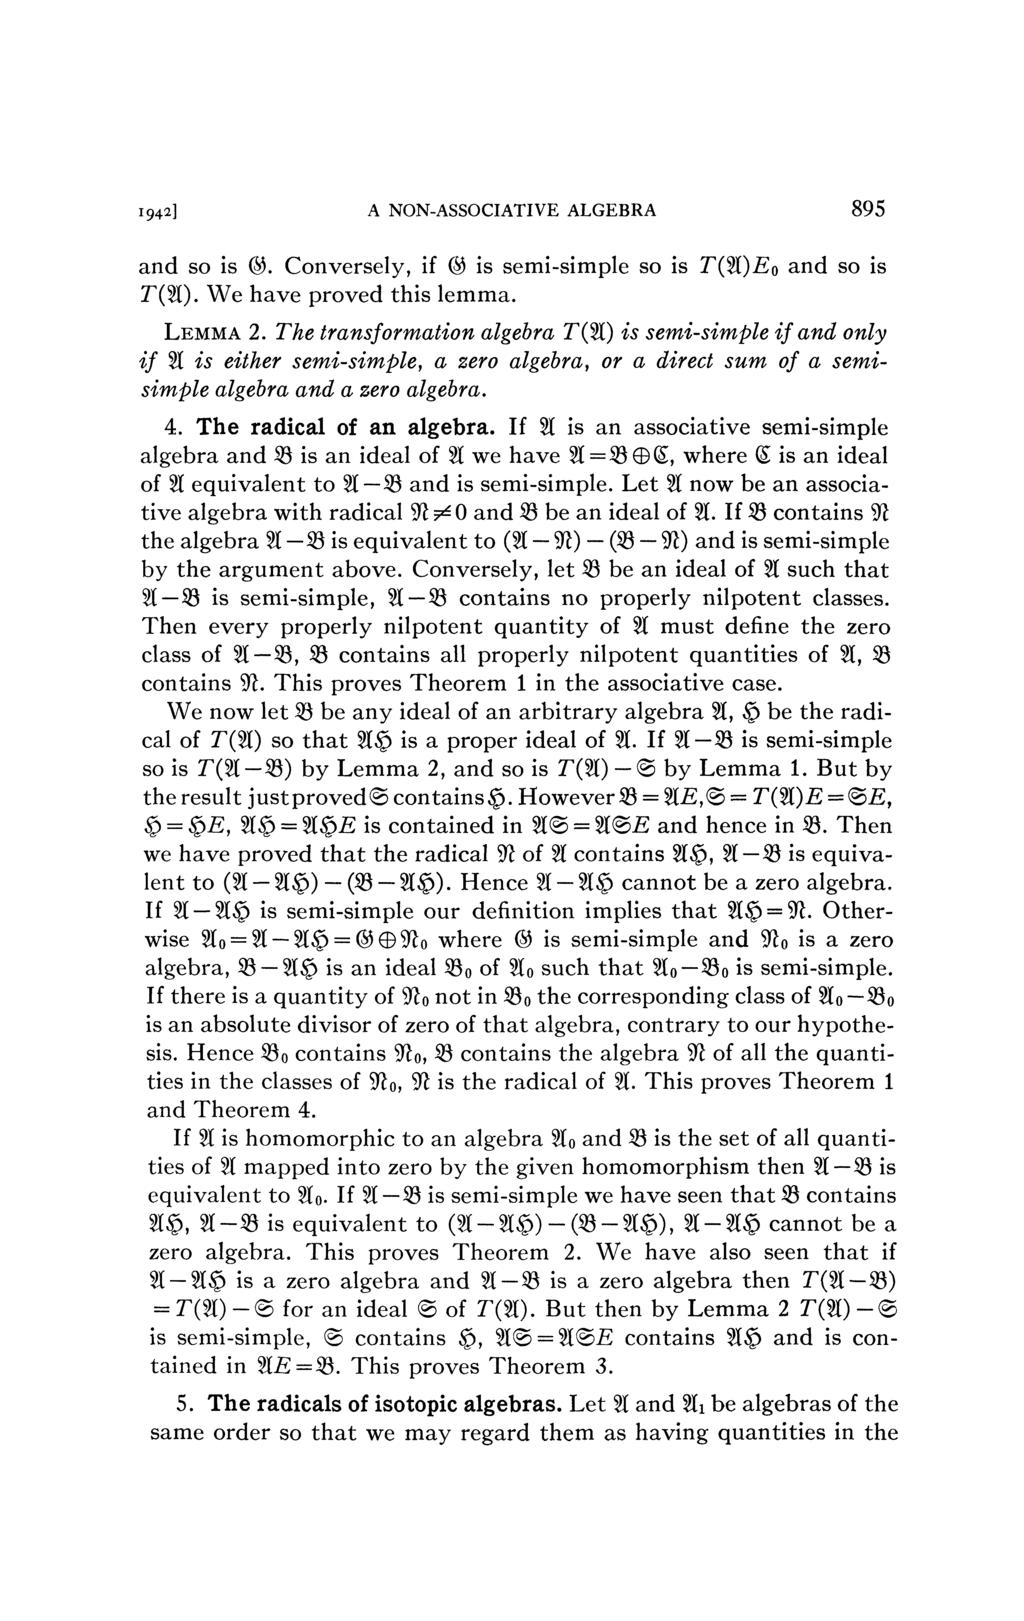 1942] A NON-ASSOCIATIVE ALGEBRA 895 and so is @. Conversely, if is semi-simple so is T($t)Eo and so is jf(sl). We have proved this lemma. LEMMA 2.